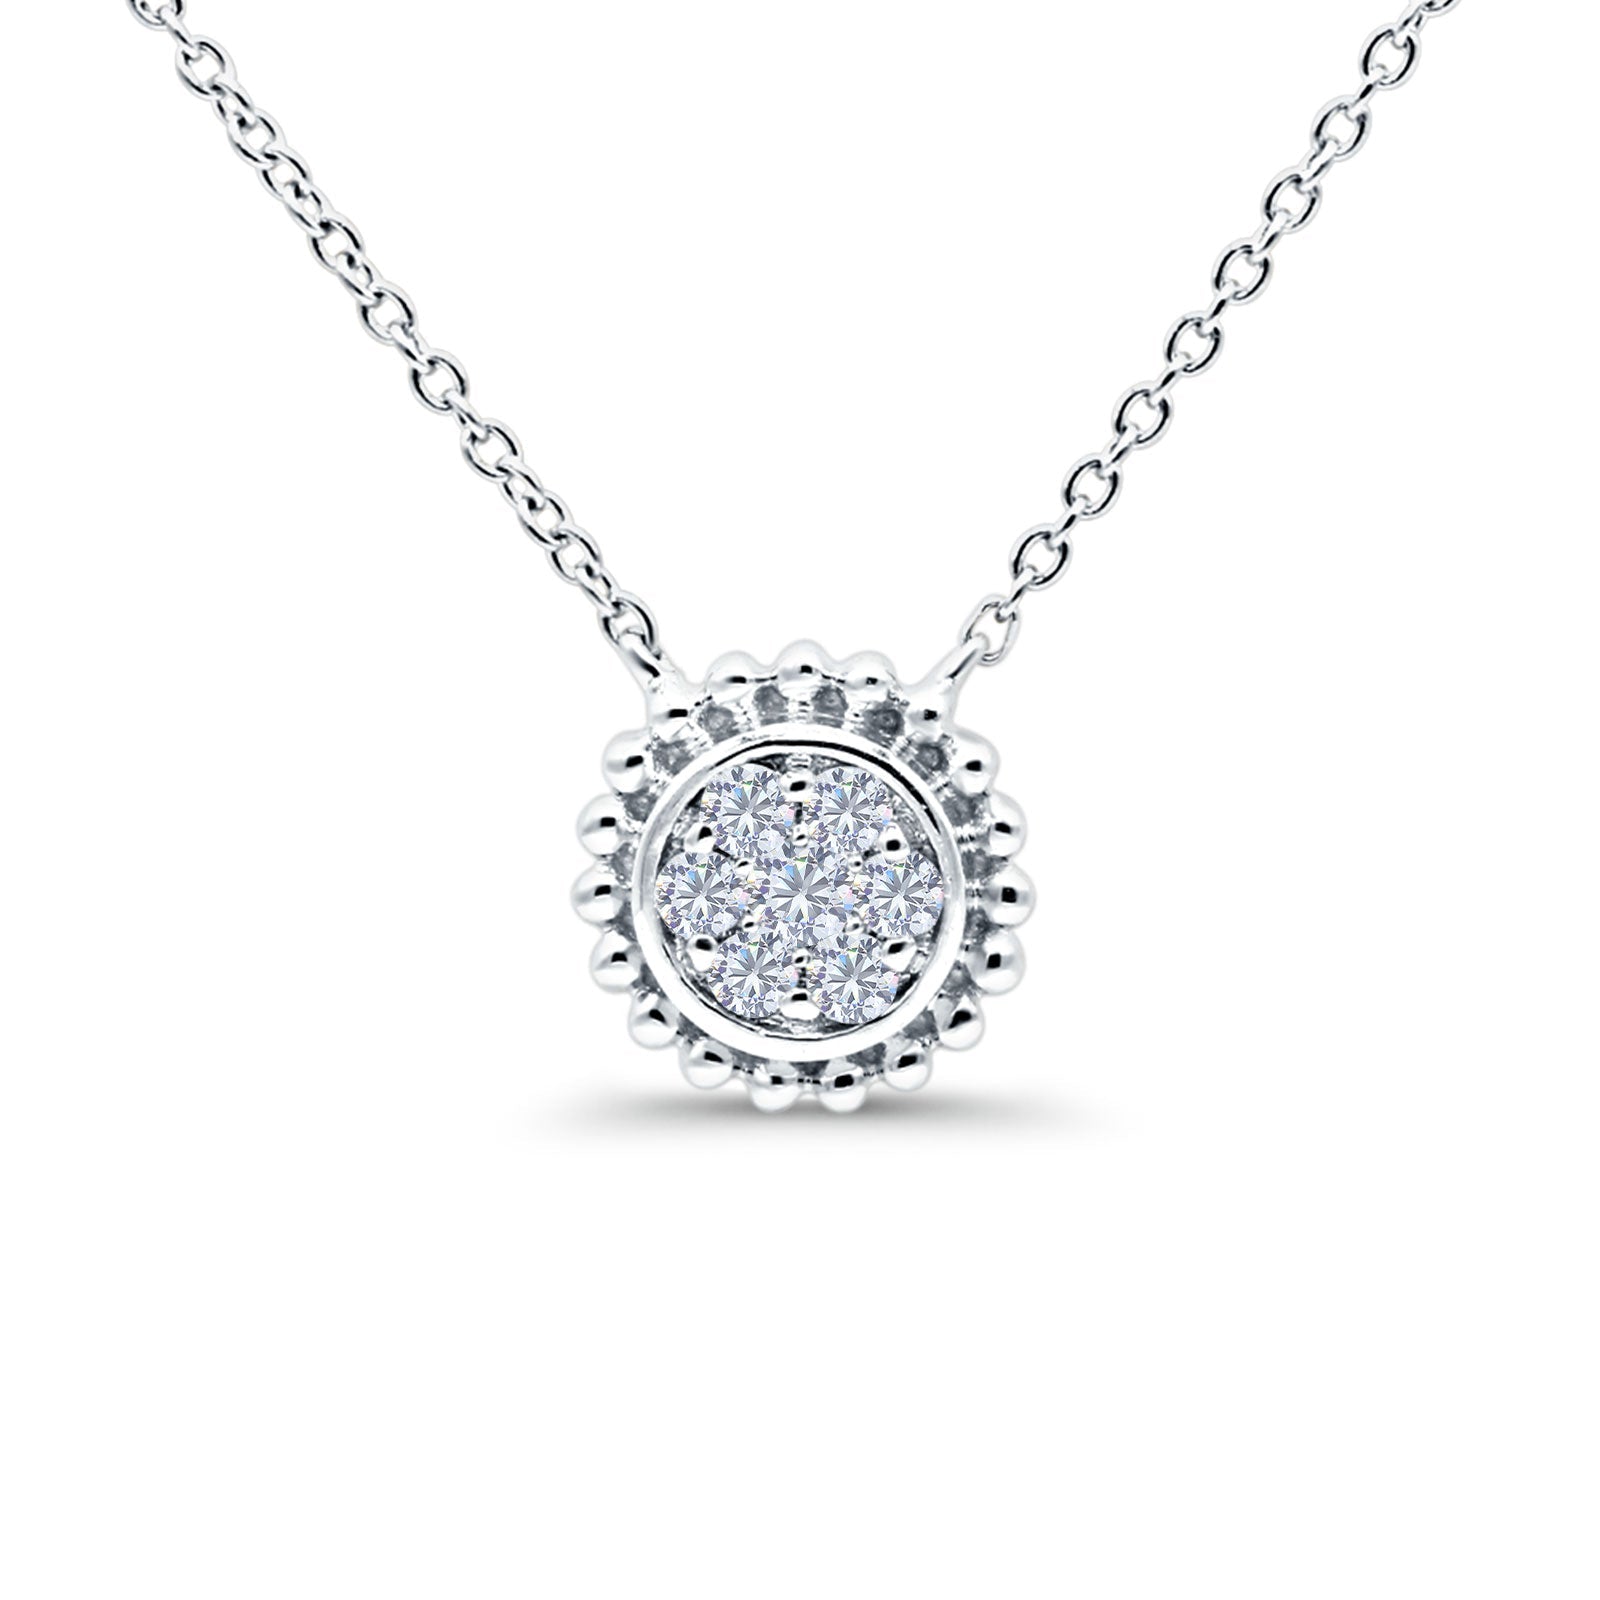 14K Gold .13ct G SI Round Diamond Solitaire Pendant Necklace 18" Chain